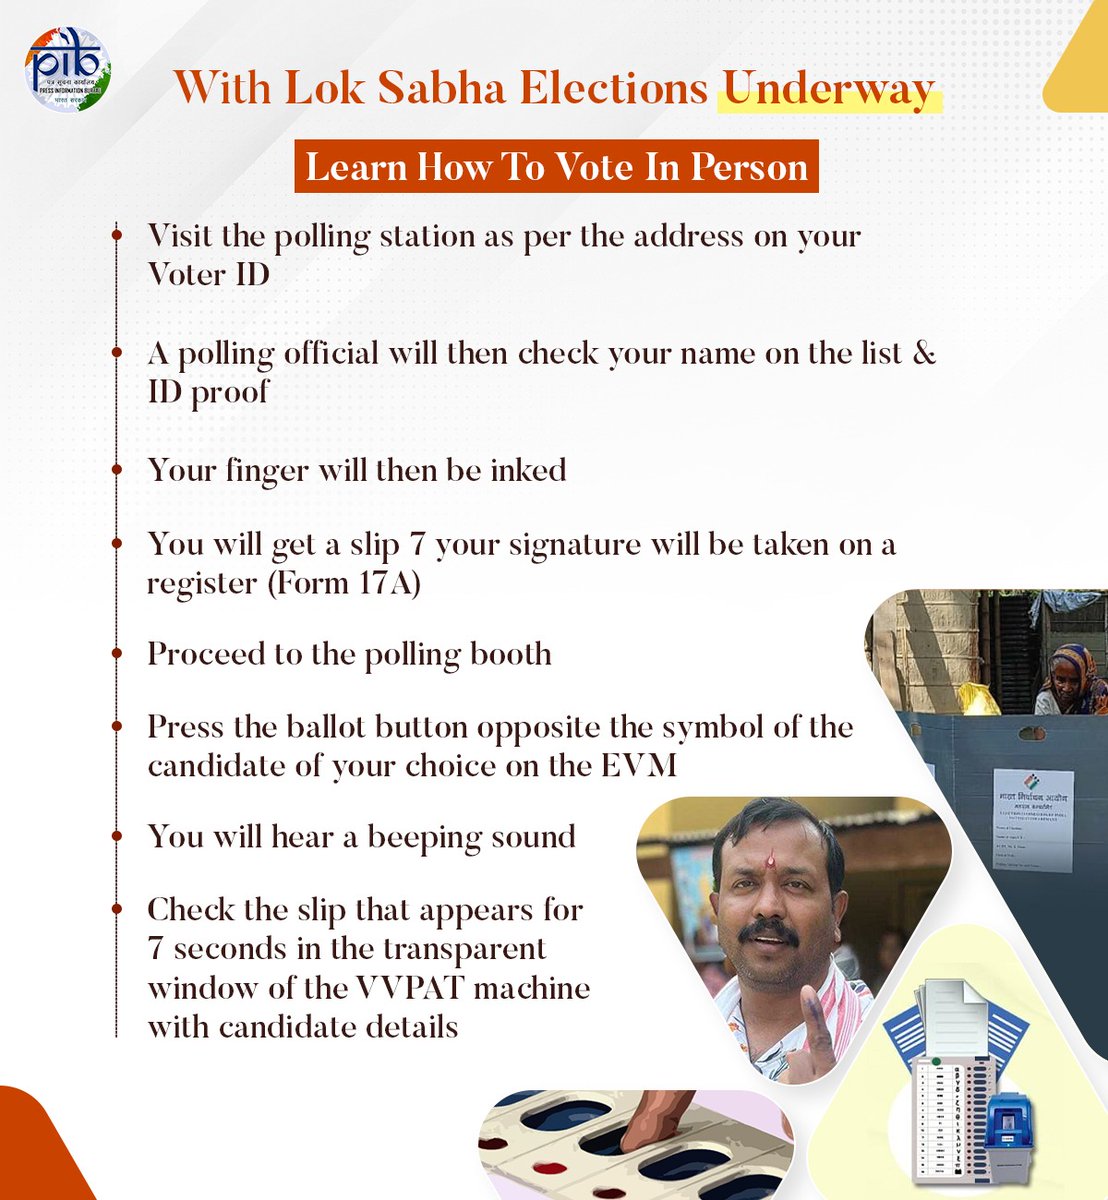 Know this step-by-step guide on how to #Vote in person with this #LokSabha elections underway #IVote4Sure #Elections2024